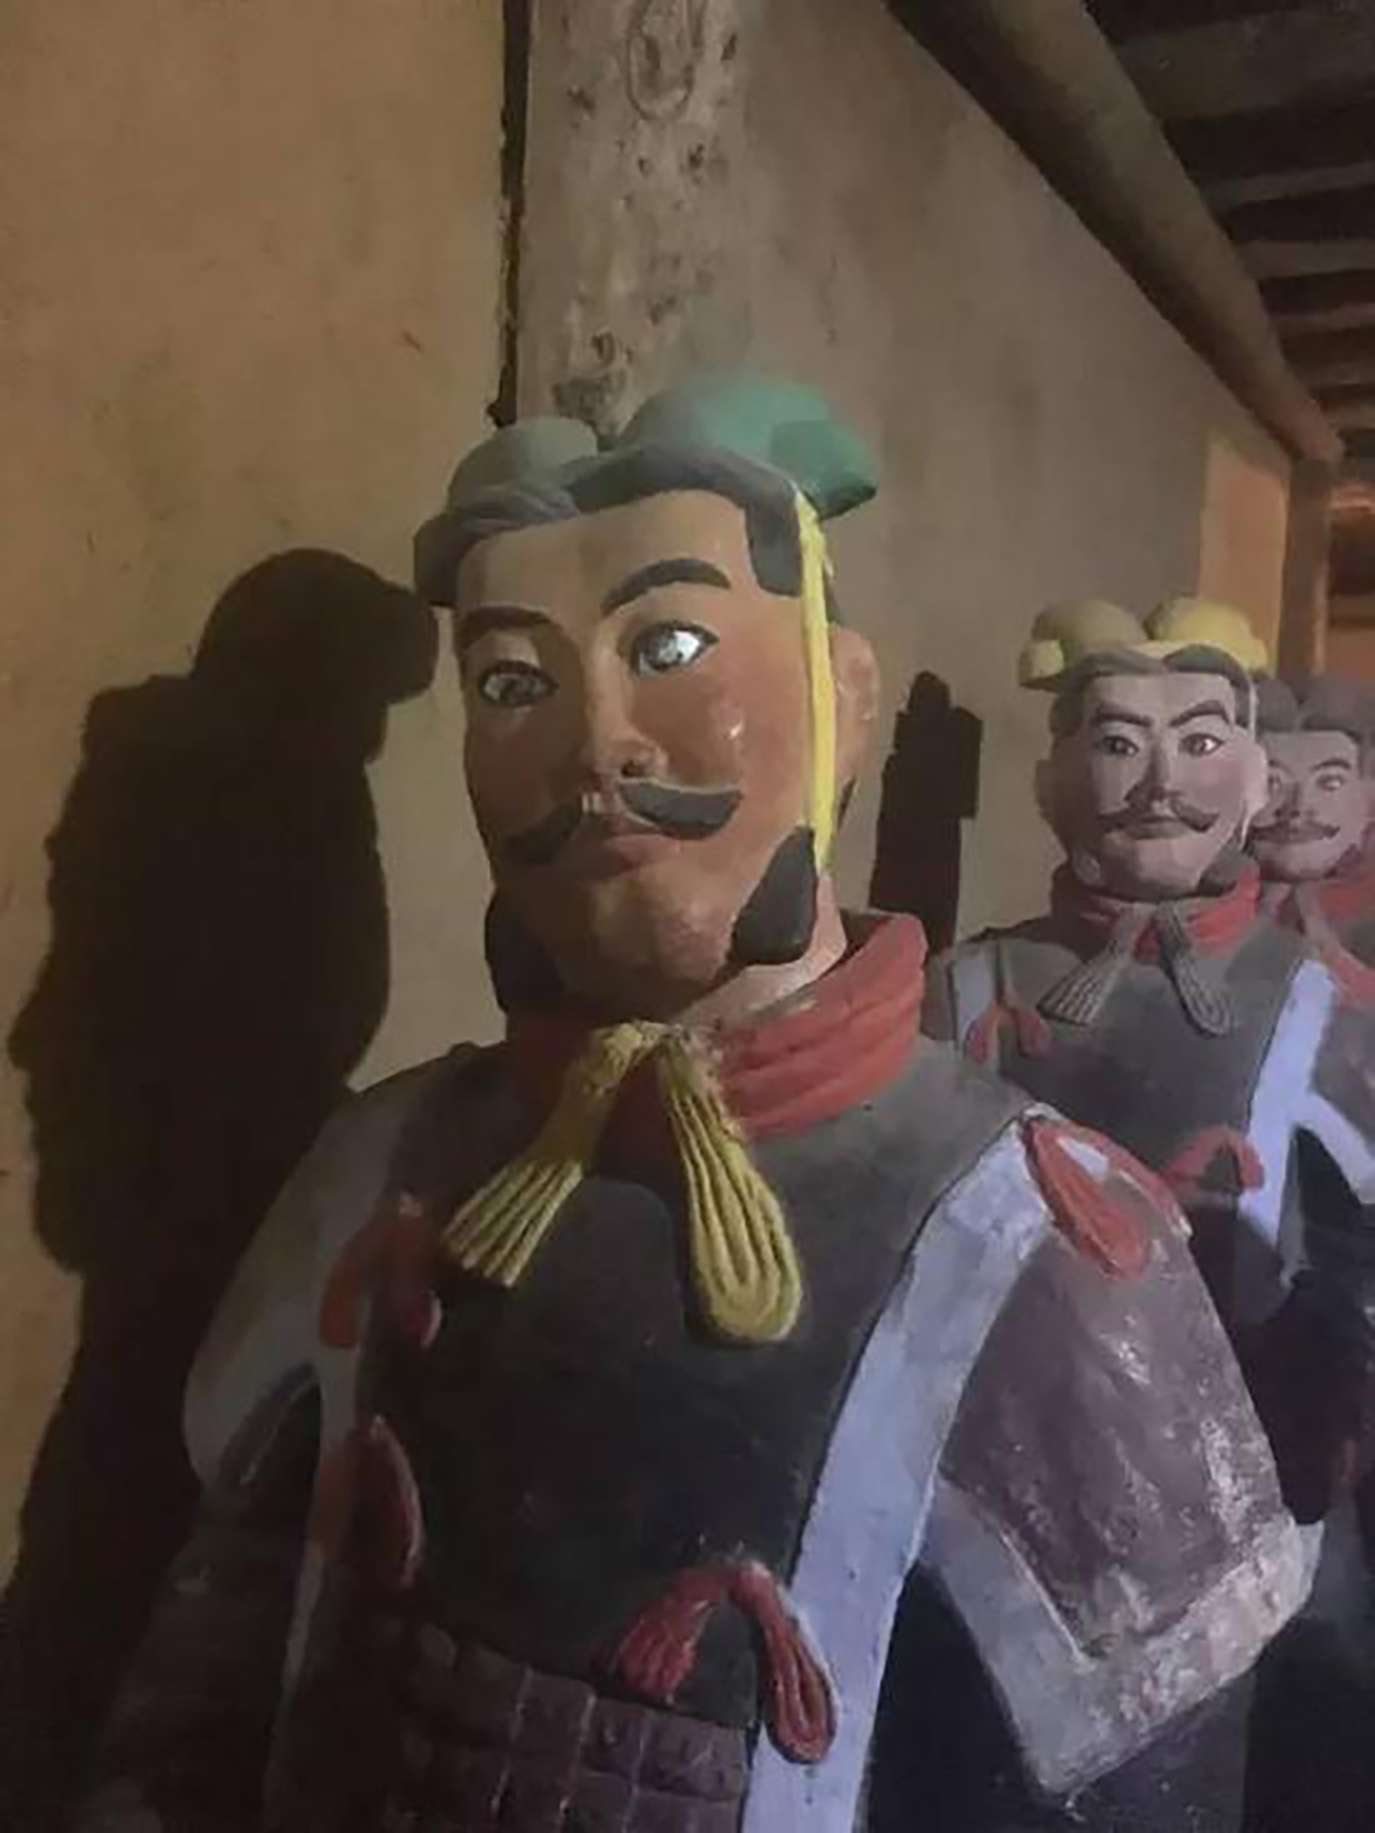 The terracotta warrior replicas at the fake site are brightly coloured with “double-lid eyes”, the blogger wrote. Photo: Handout